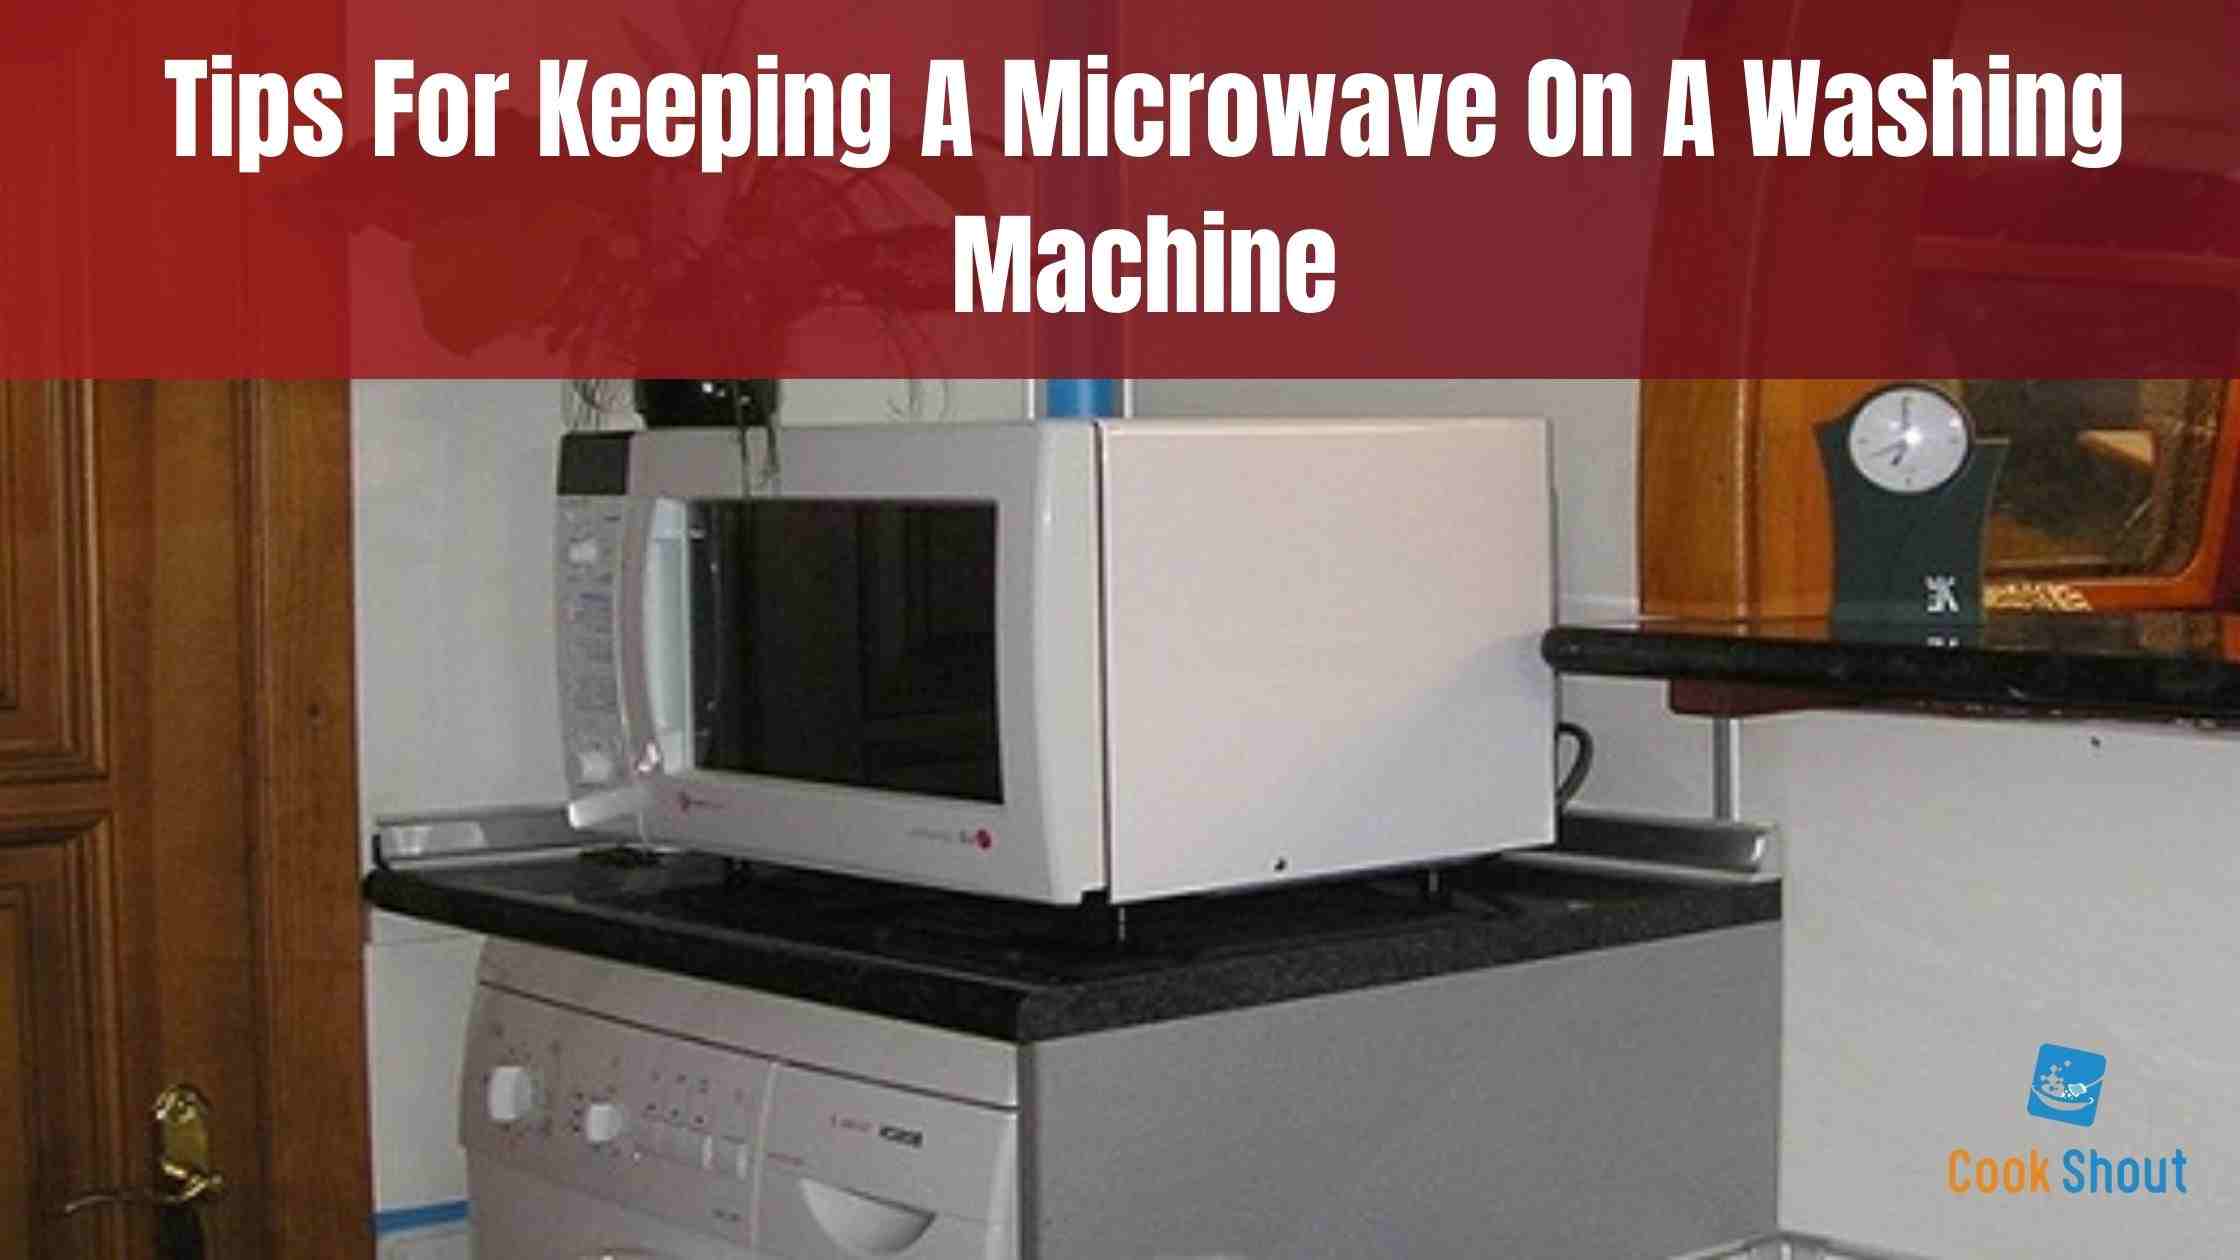 Tips For Keeping A Microwave On A Washing Machine